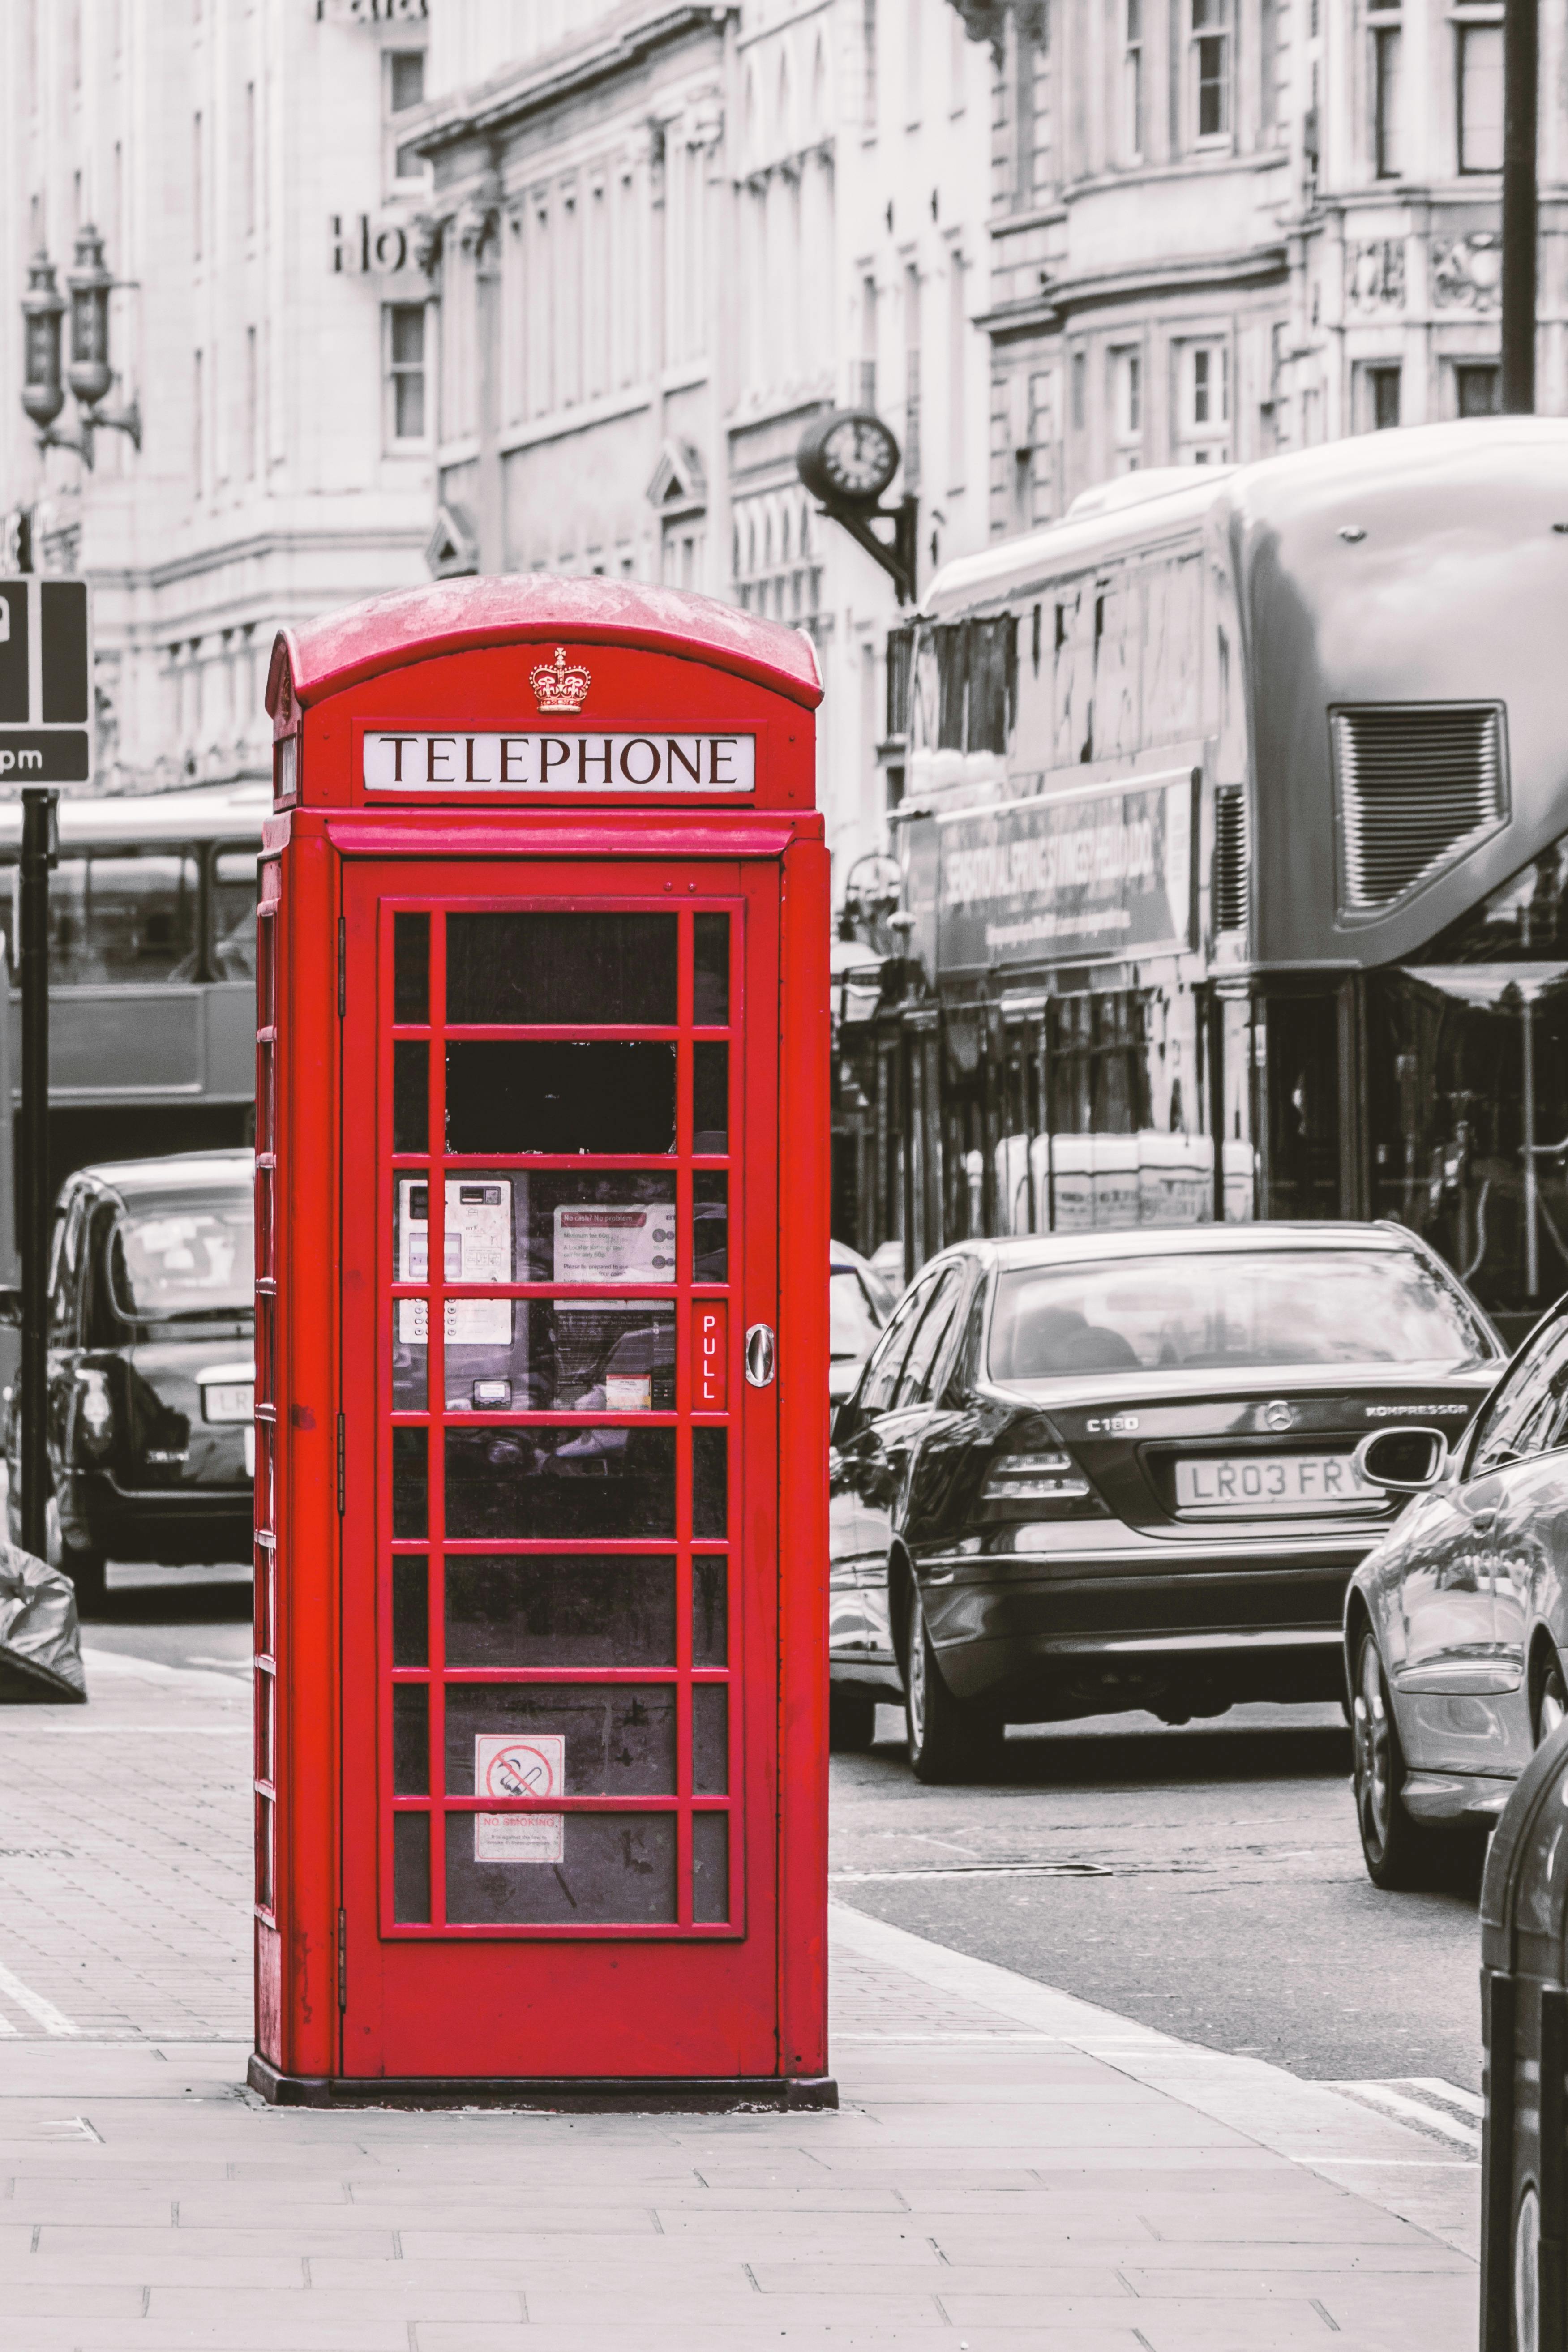 Selective Color Photography of Telephone Booth